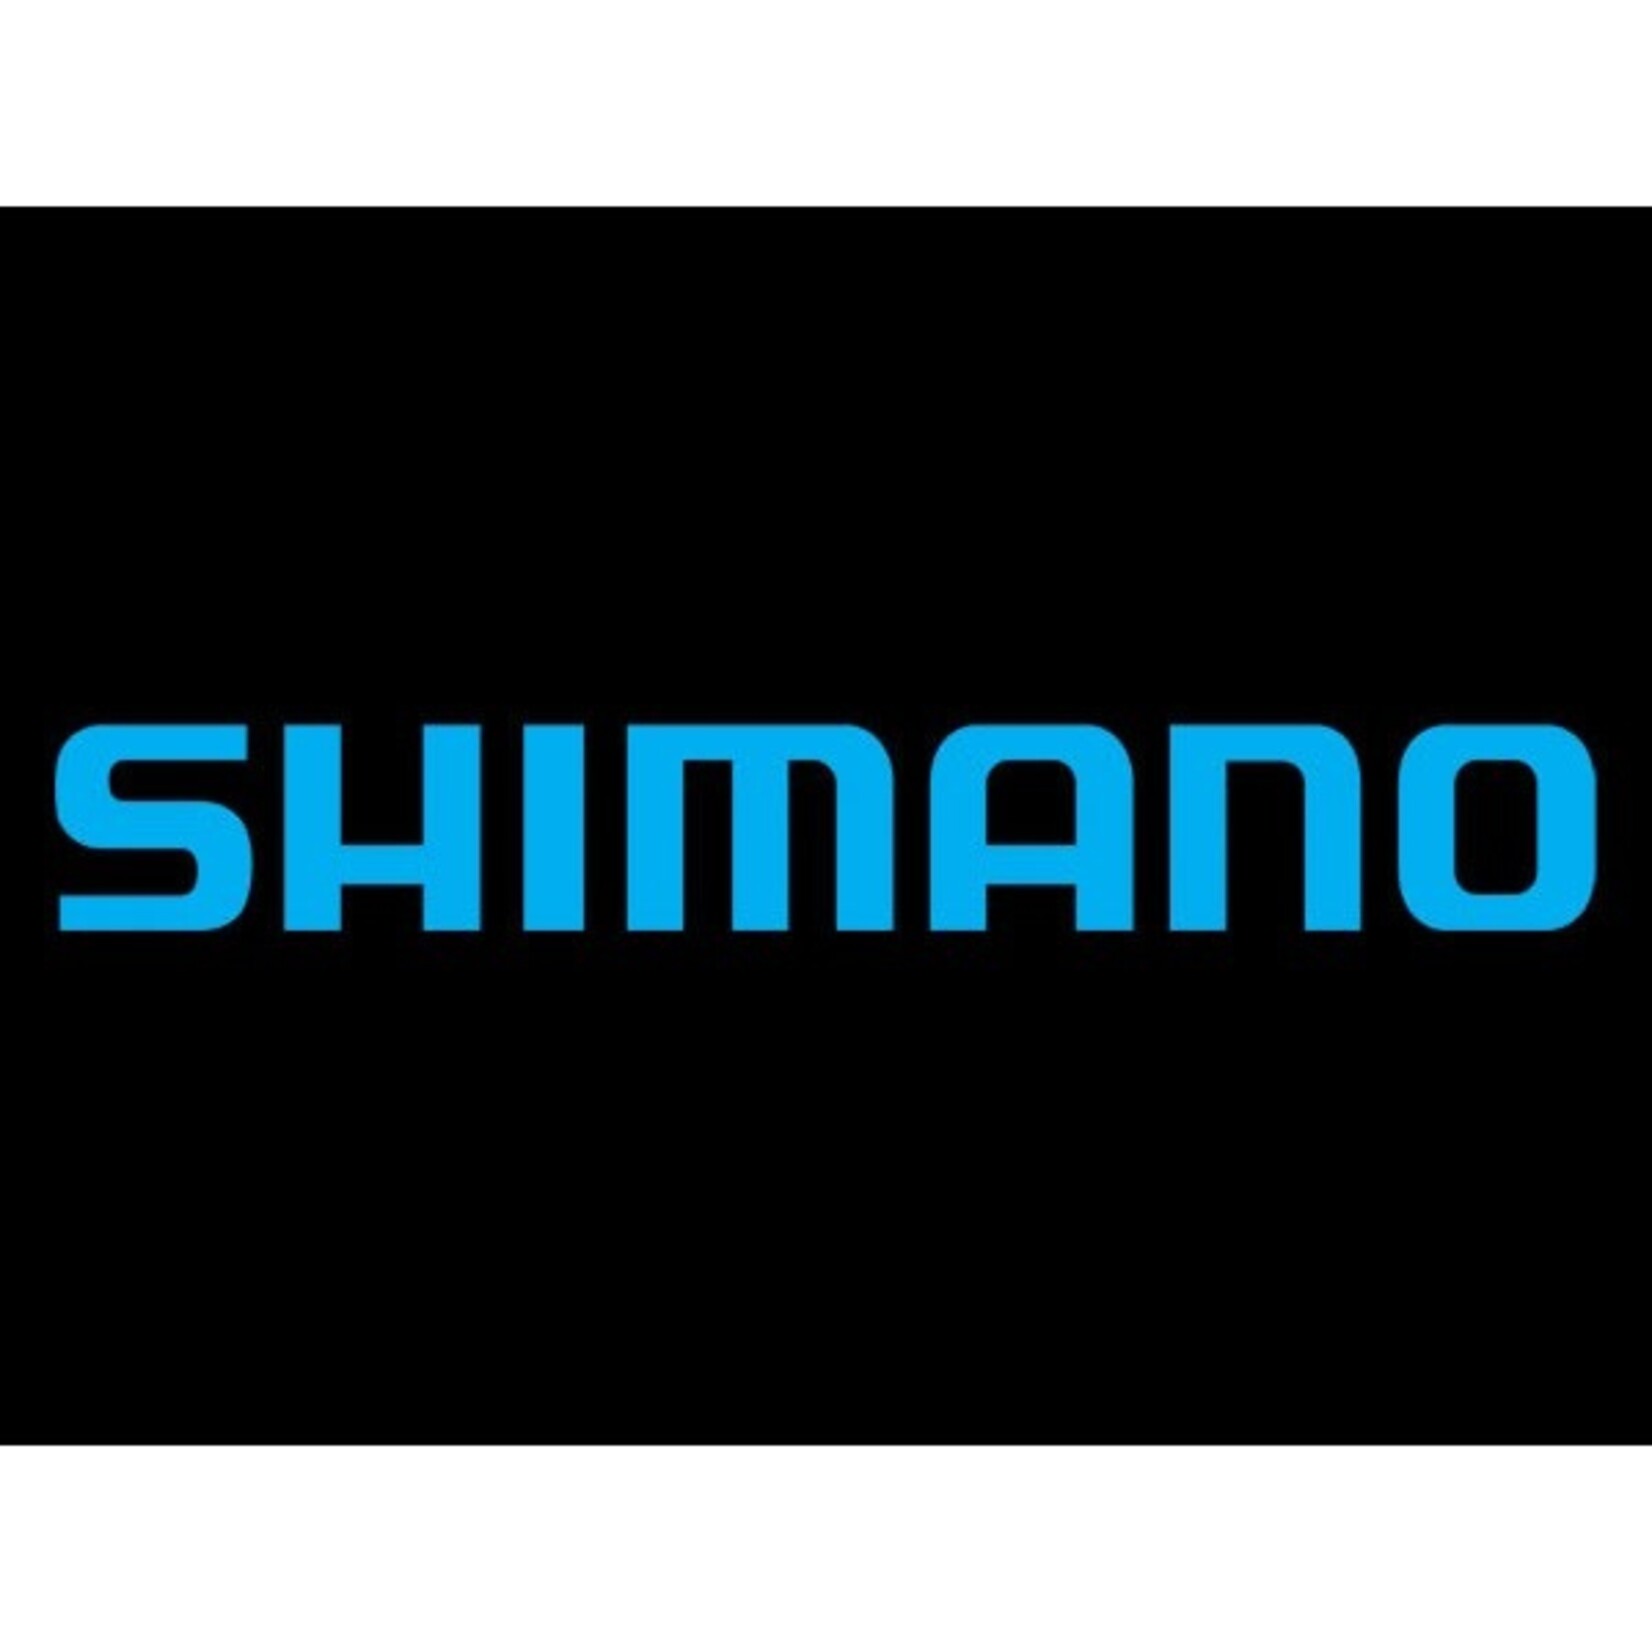 SHIMANO SHIMANO DYNA-SYS PULLEY SET HIGH GRADE - GUIDE & TENSION RD-M780 / M781 / M786 / M773